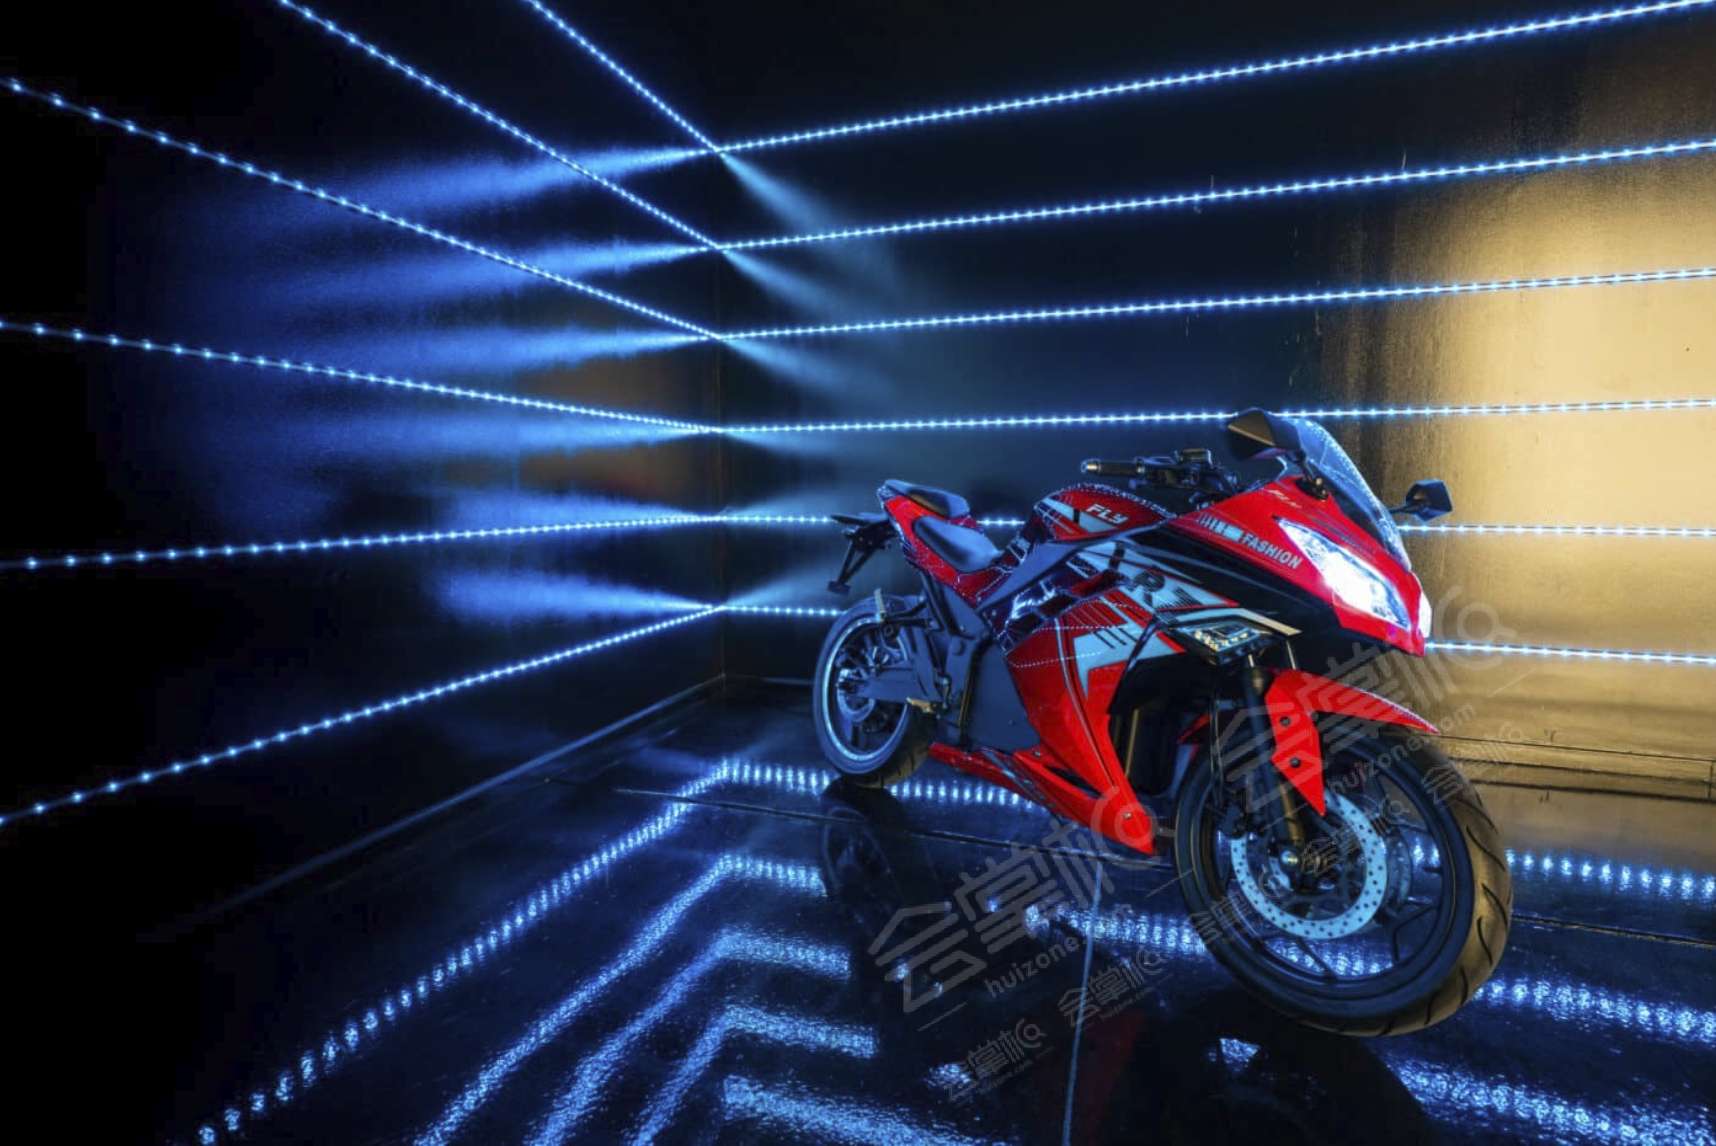 Chi-1 Large blackout studio with high ceilings, a Sport Bike, controllable sound synchronized RGB Lights, and RGB Tunnel for car photo and video shoots